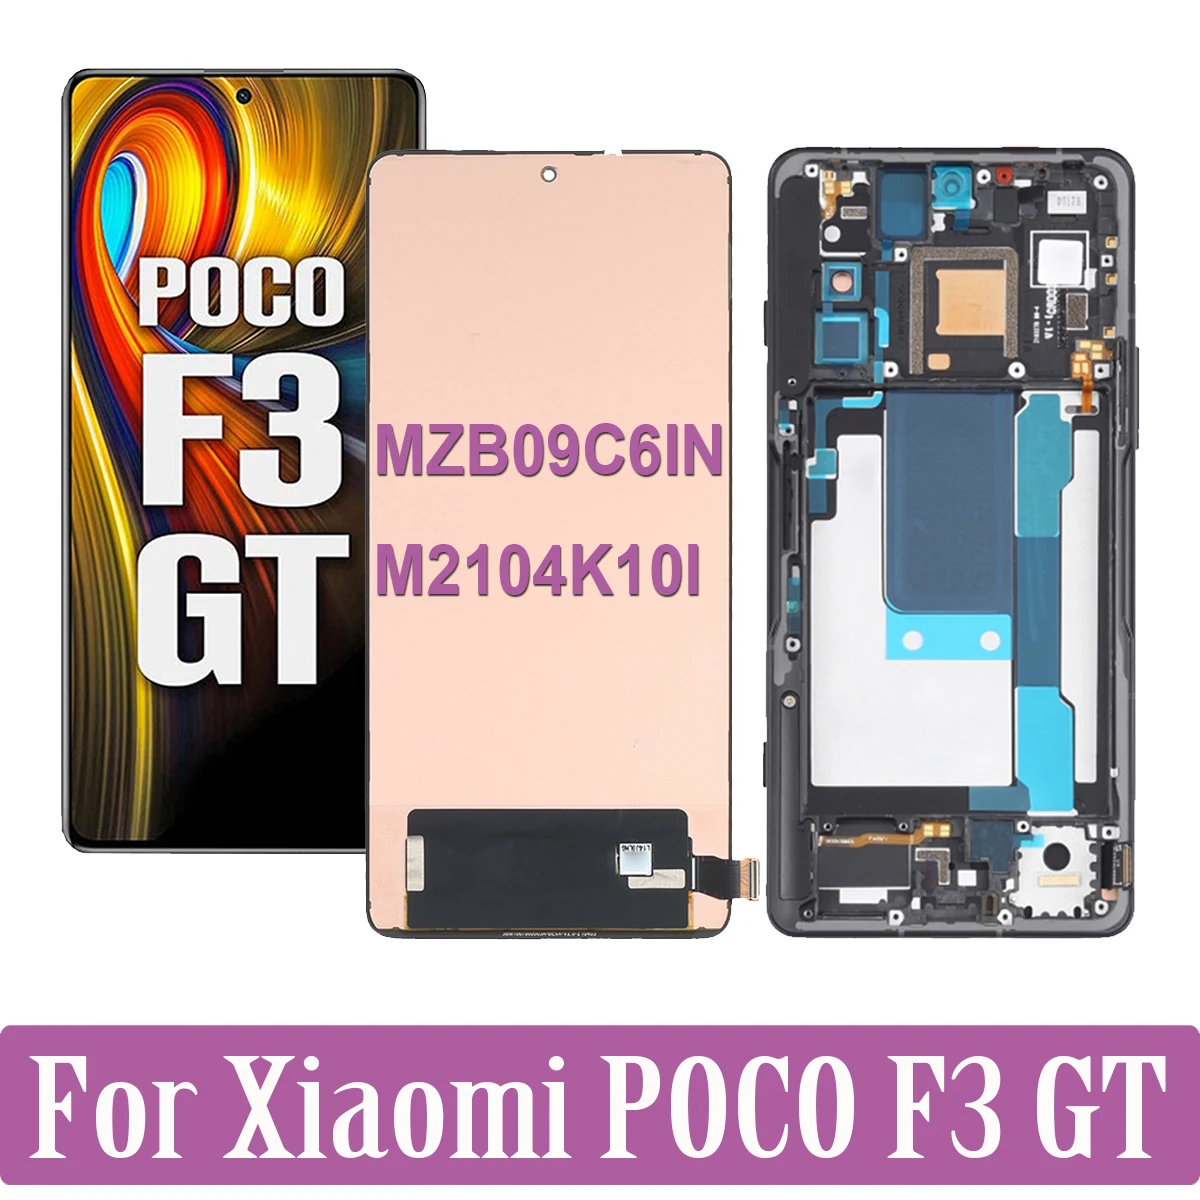 Original 6.67'' AMOLED Display For Xiaomi POCO F3 GT MZB09C6IN M2104K10I LCD Display Touch Screen Replacement Digitizer Assembly